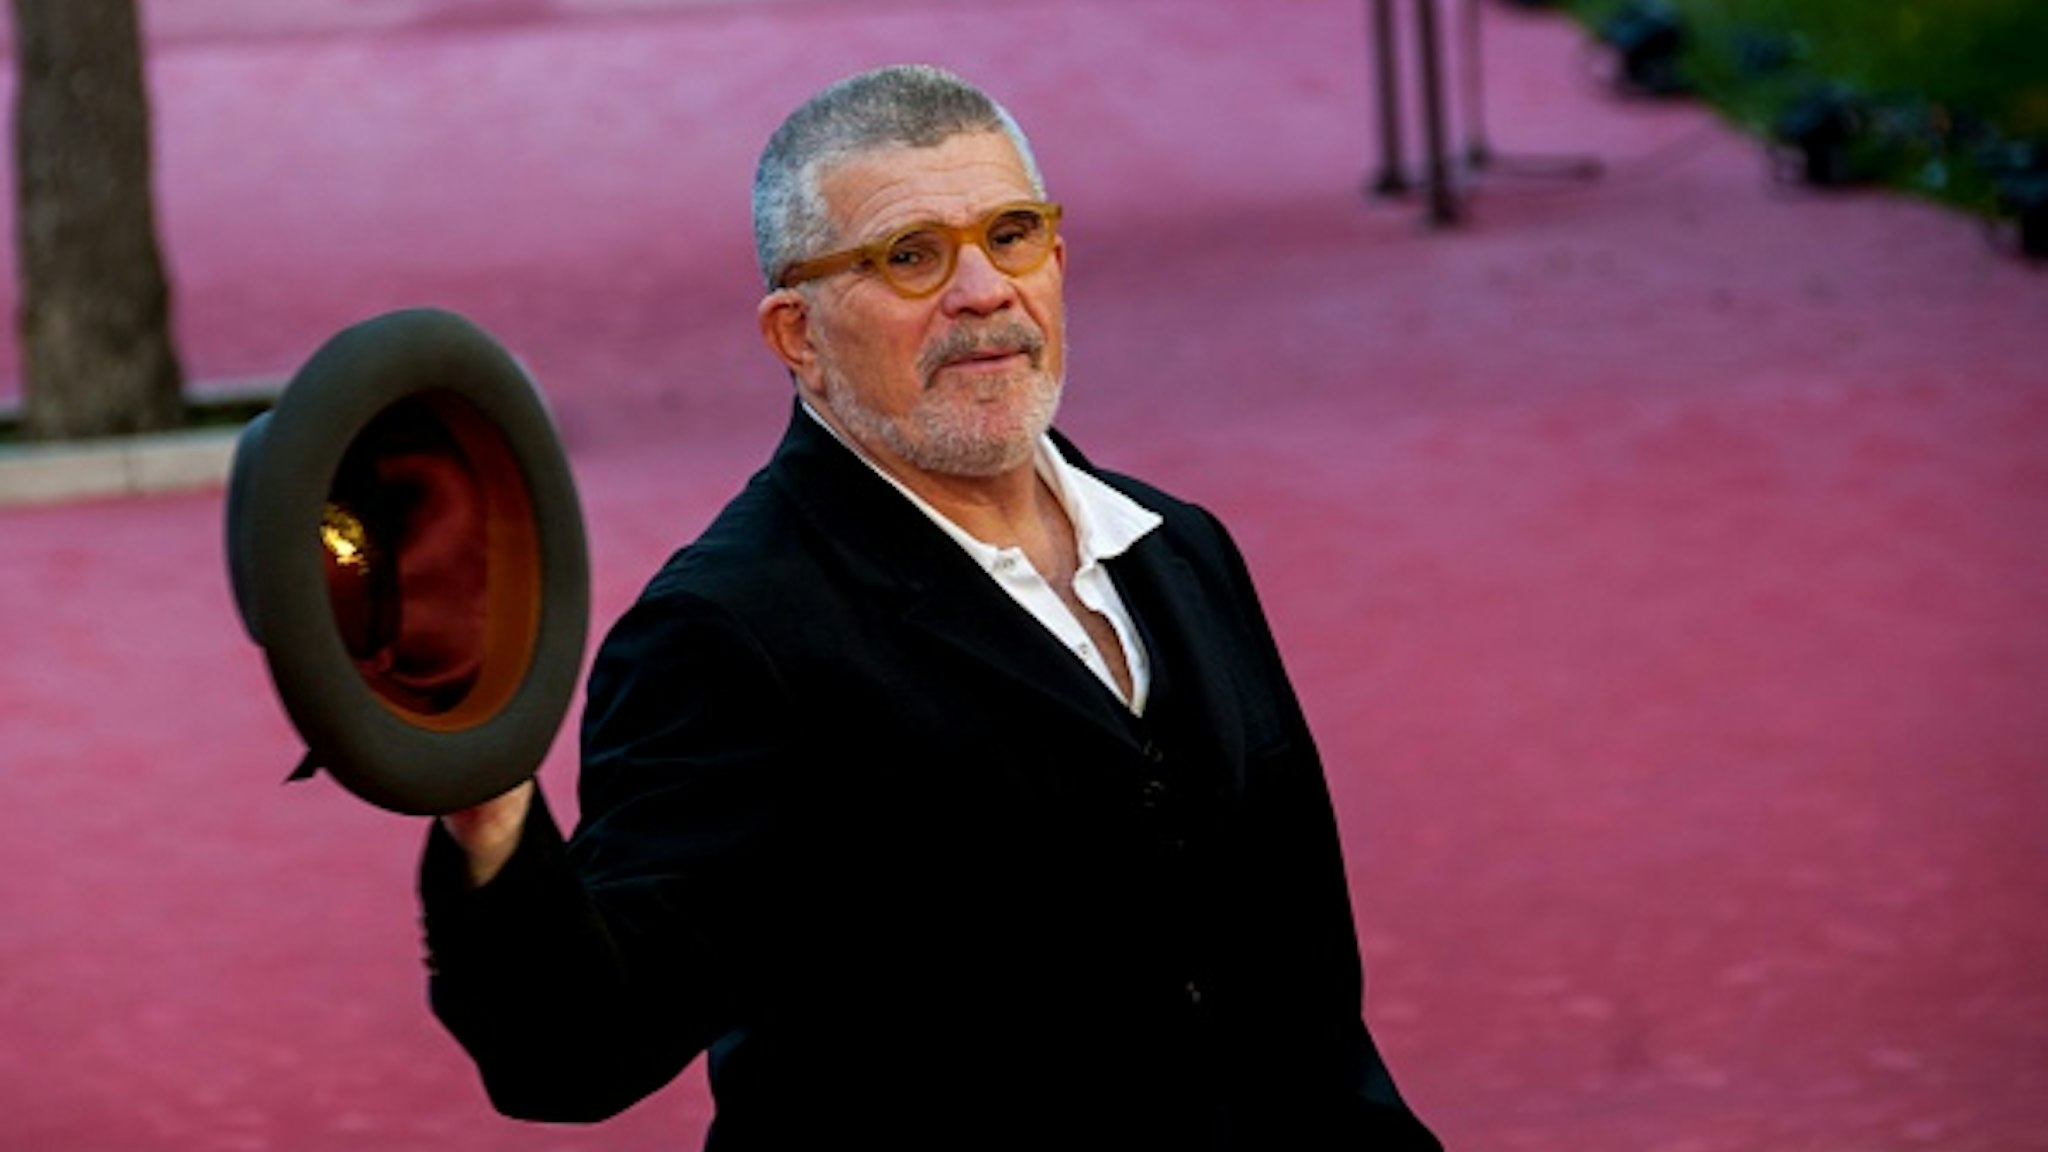 ROME, ITALY - 2016/10/18: David Mamet the Pulitzer Prize winner on the red carpet of the 11th edition of the film festival. David Alan Mamet is an American playwright, essayist, screenwriter, and film director. As a playwright, Mamet has won a Pulitzer Prize.